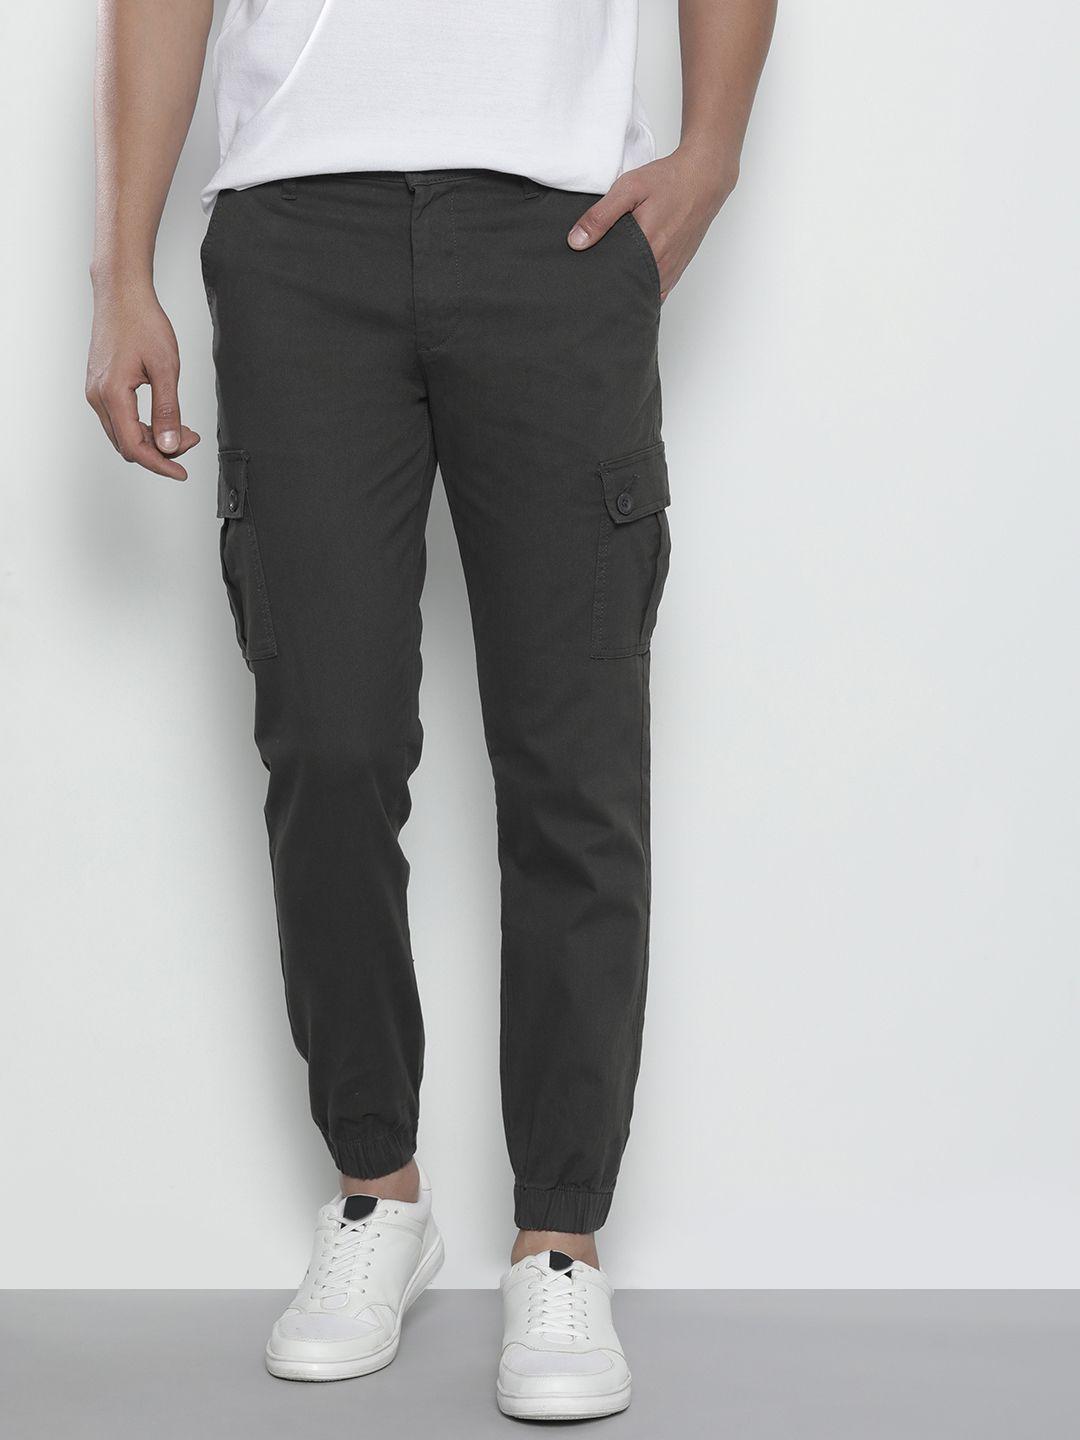 the indian garage co men charcoal grey slim fit cargos trousers